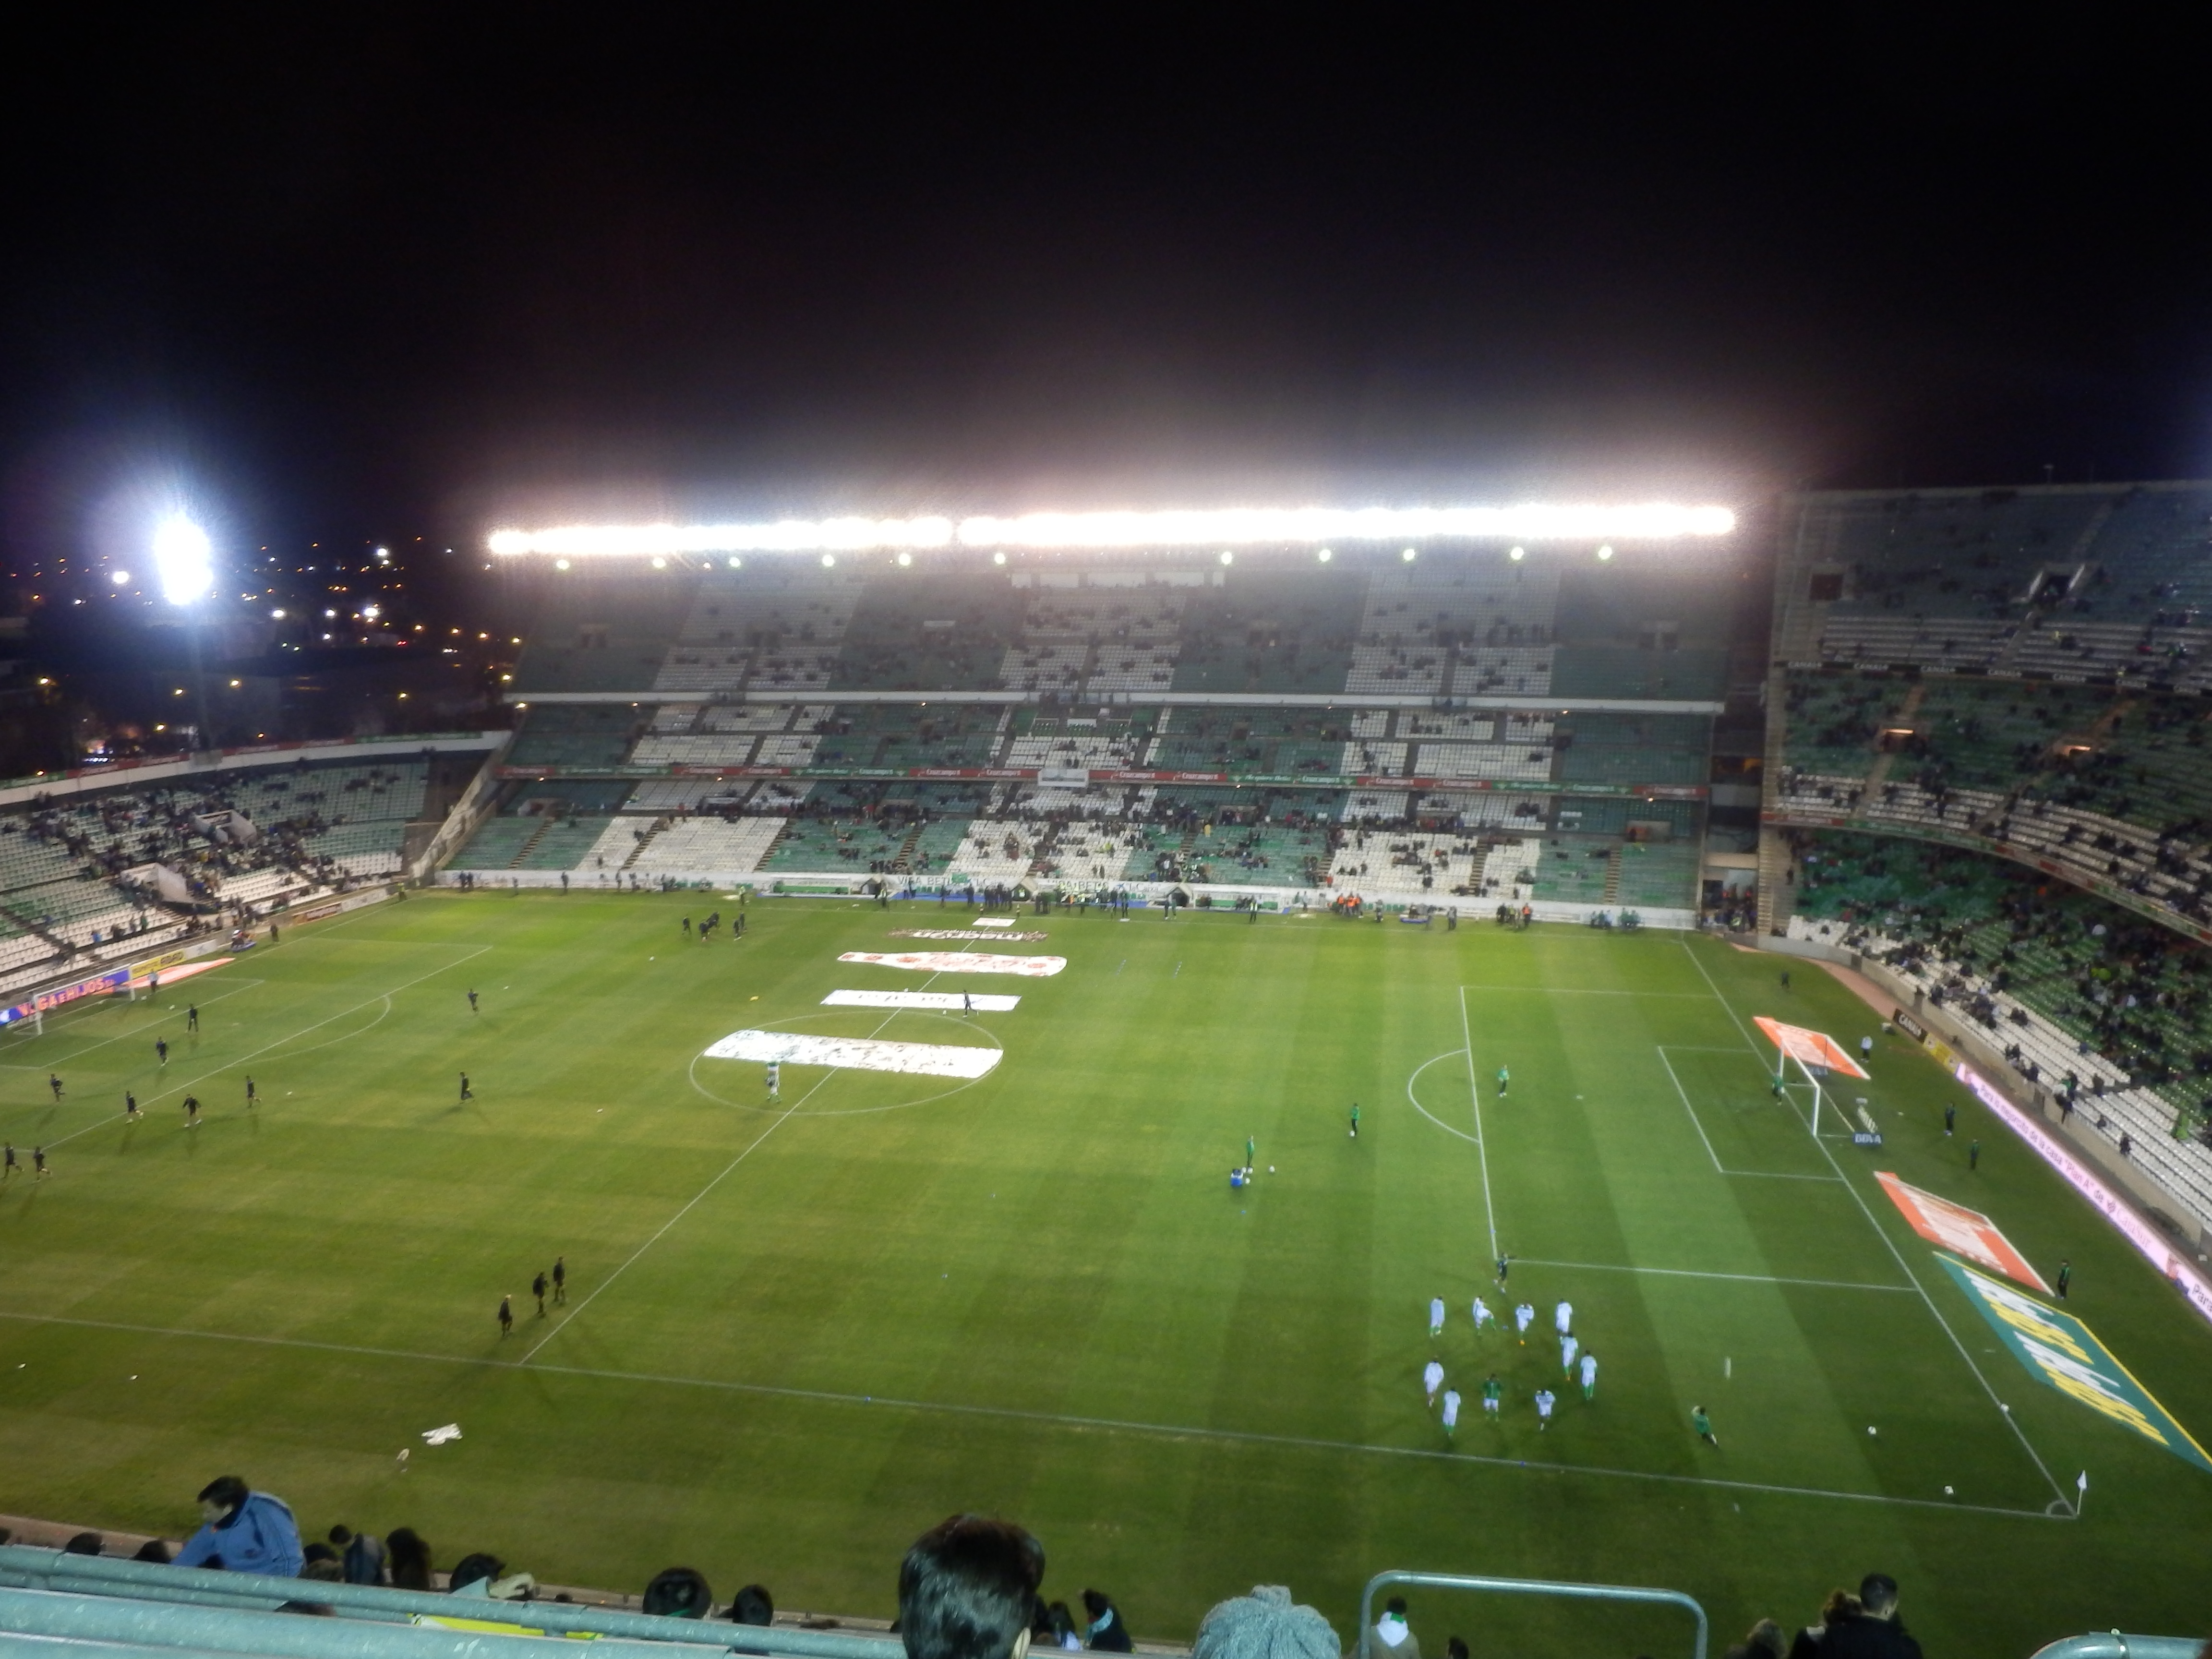 Real Betis V Real Valladolid | A year in Seville